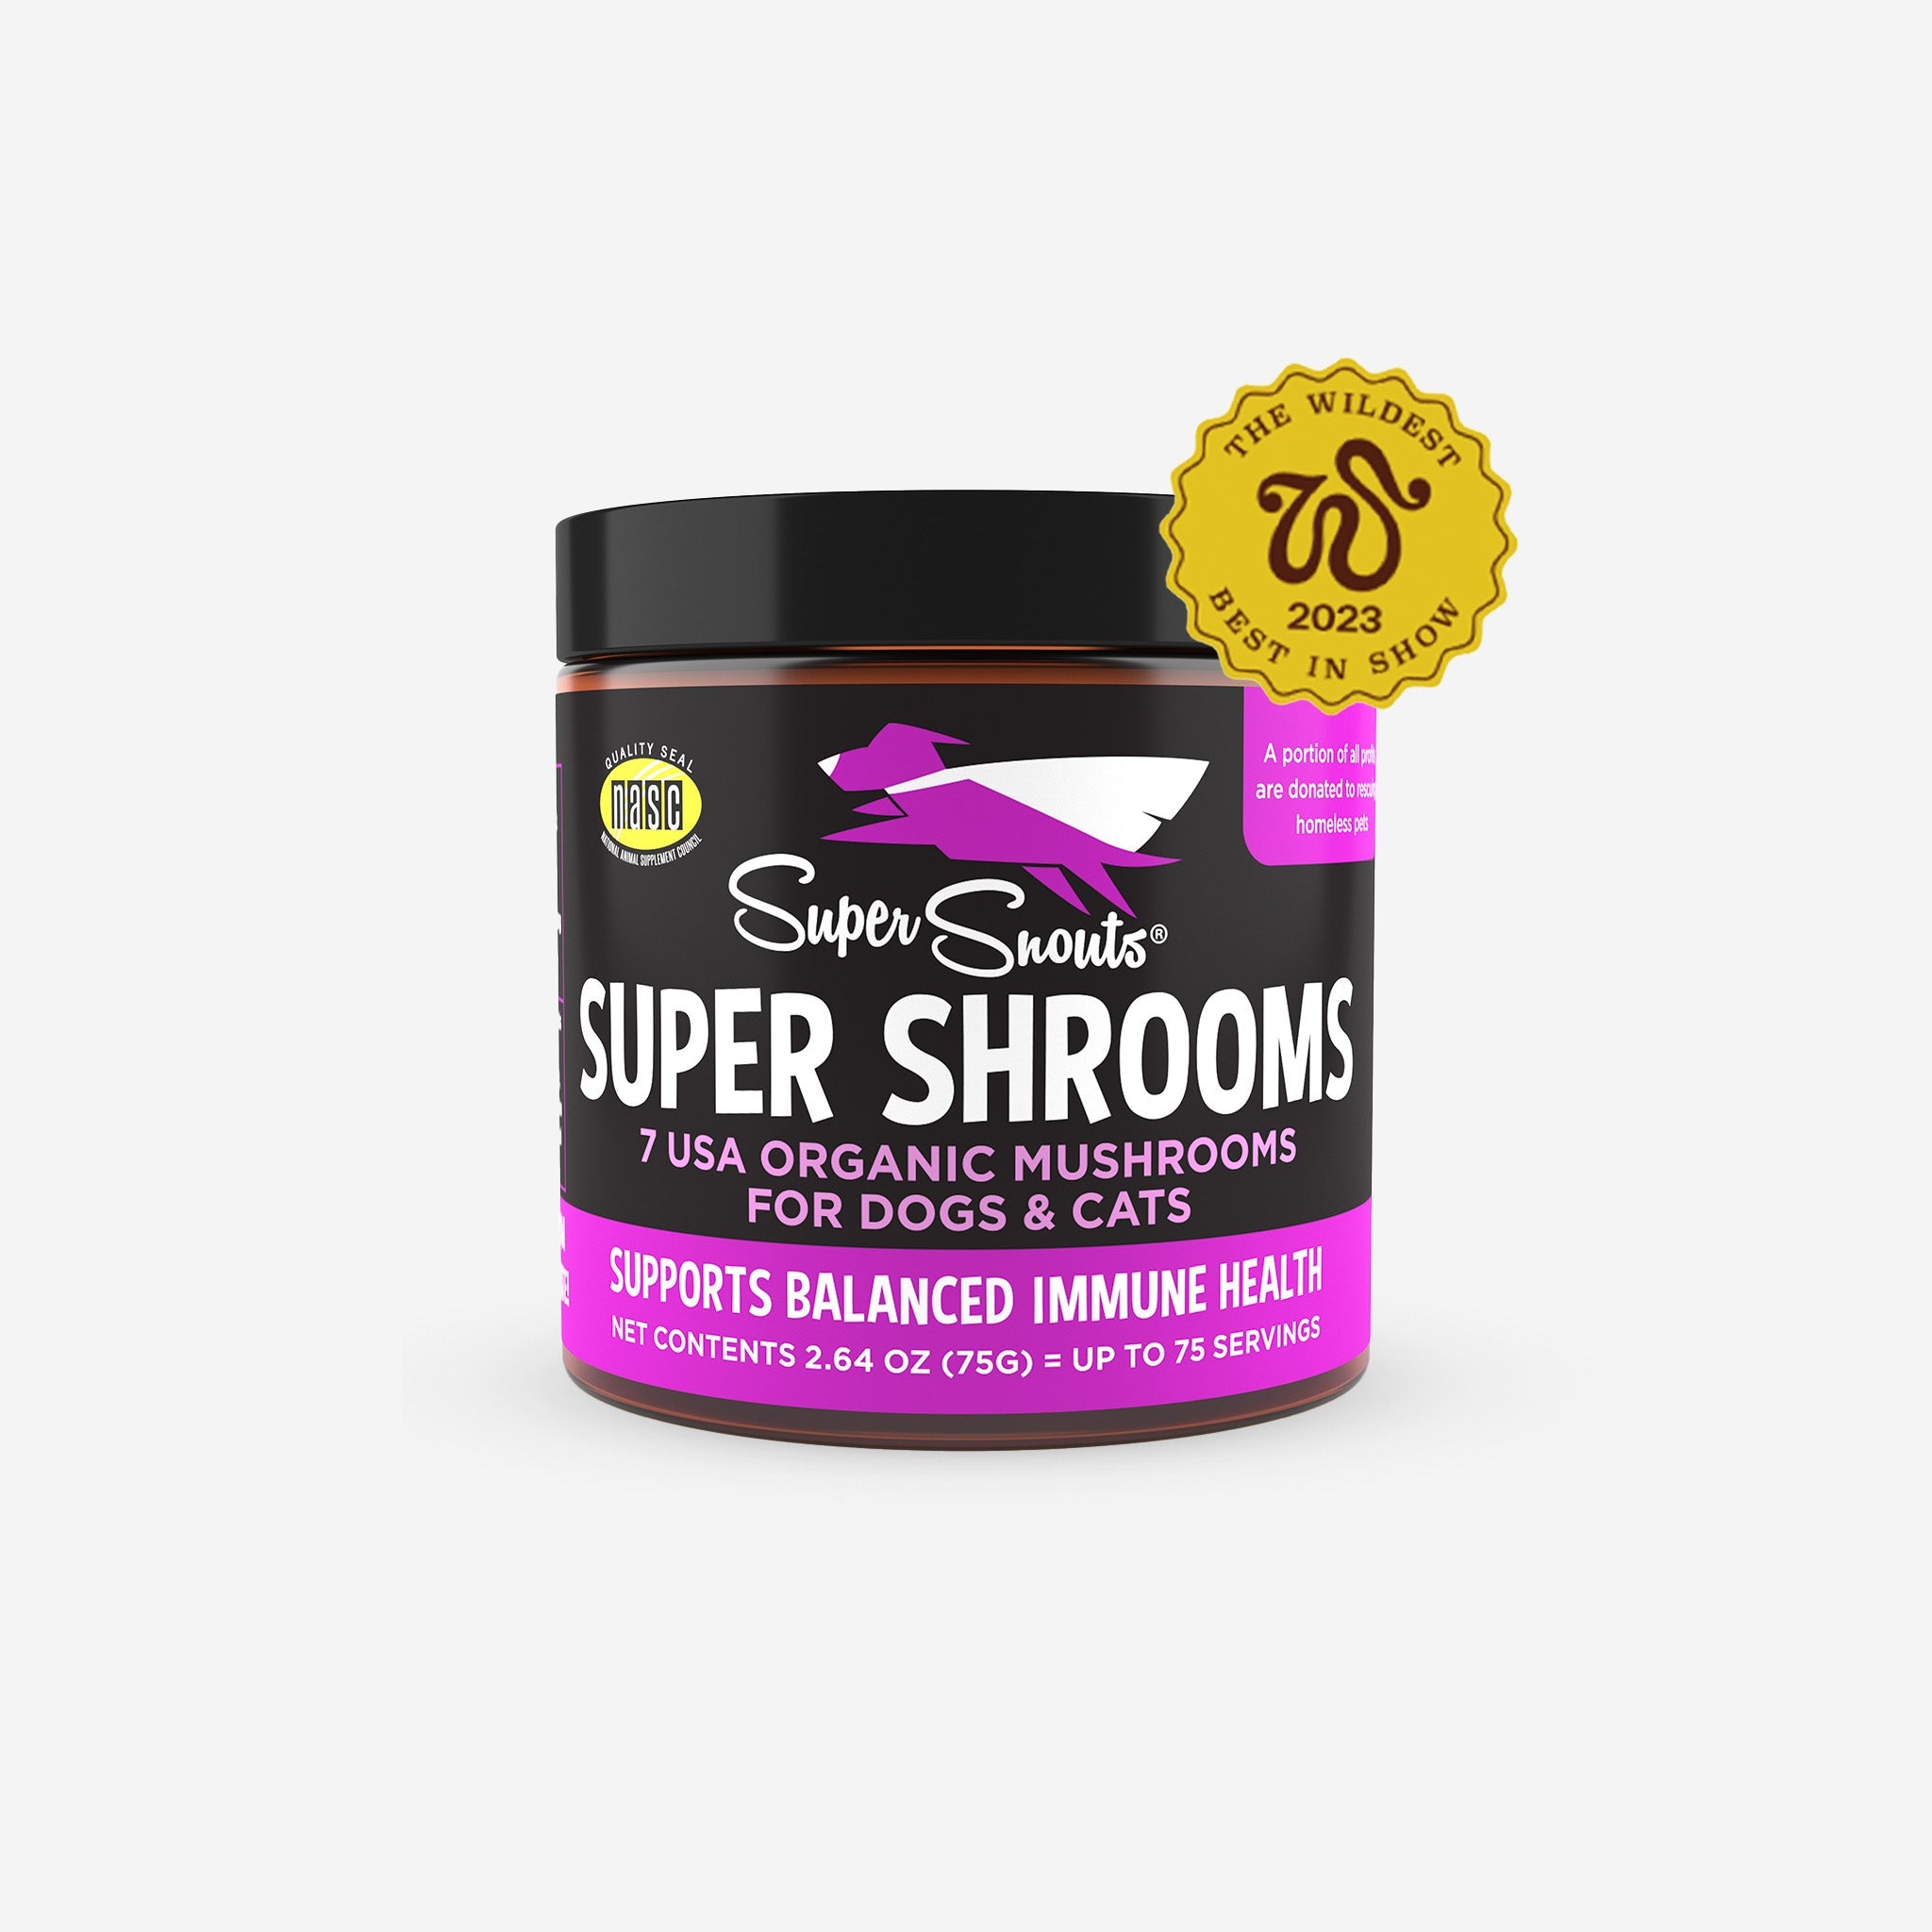 Super Snouts Super Shrooms for Immune Health in Dogs & Cats